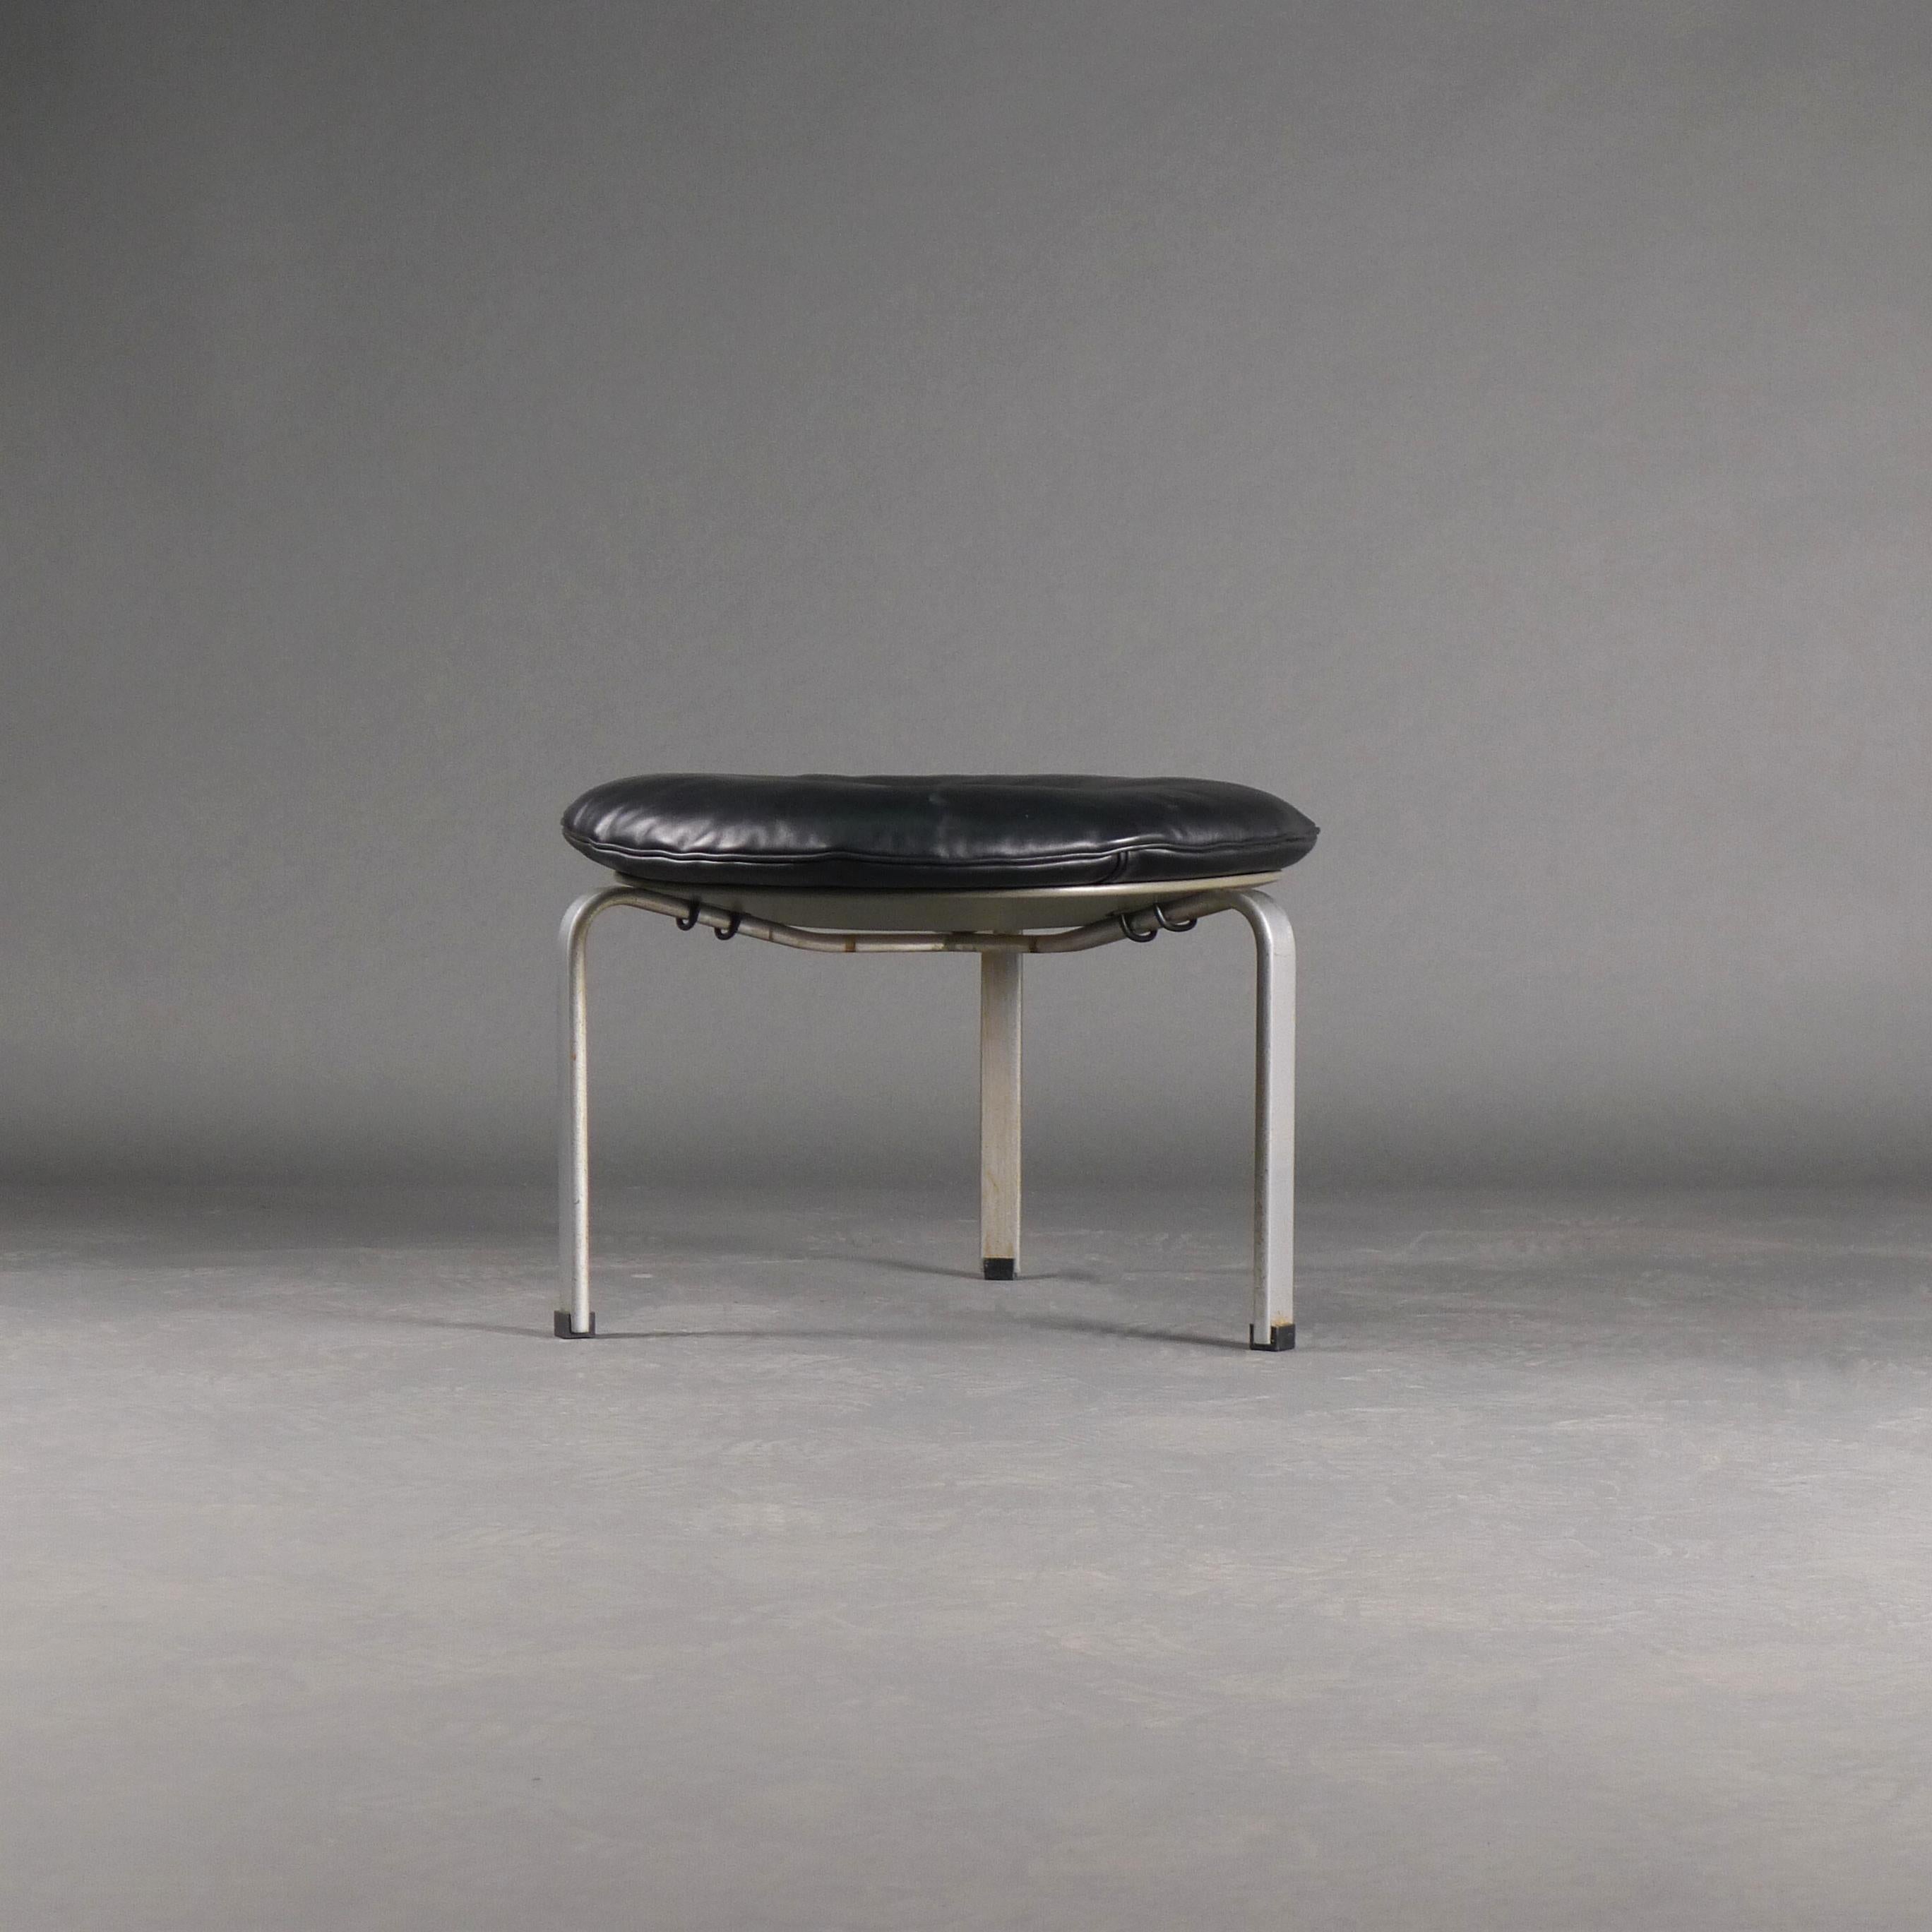 Circular PK33 stool, designed in 1958 by Poul Kjaerholm and manufactured by E Kold Christensen (bears their stamp).

Removable leather seat cushion with central button, grey lacquered plywood circular seat and steel legs with black plastic